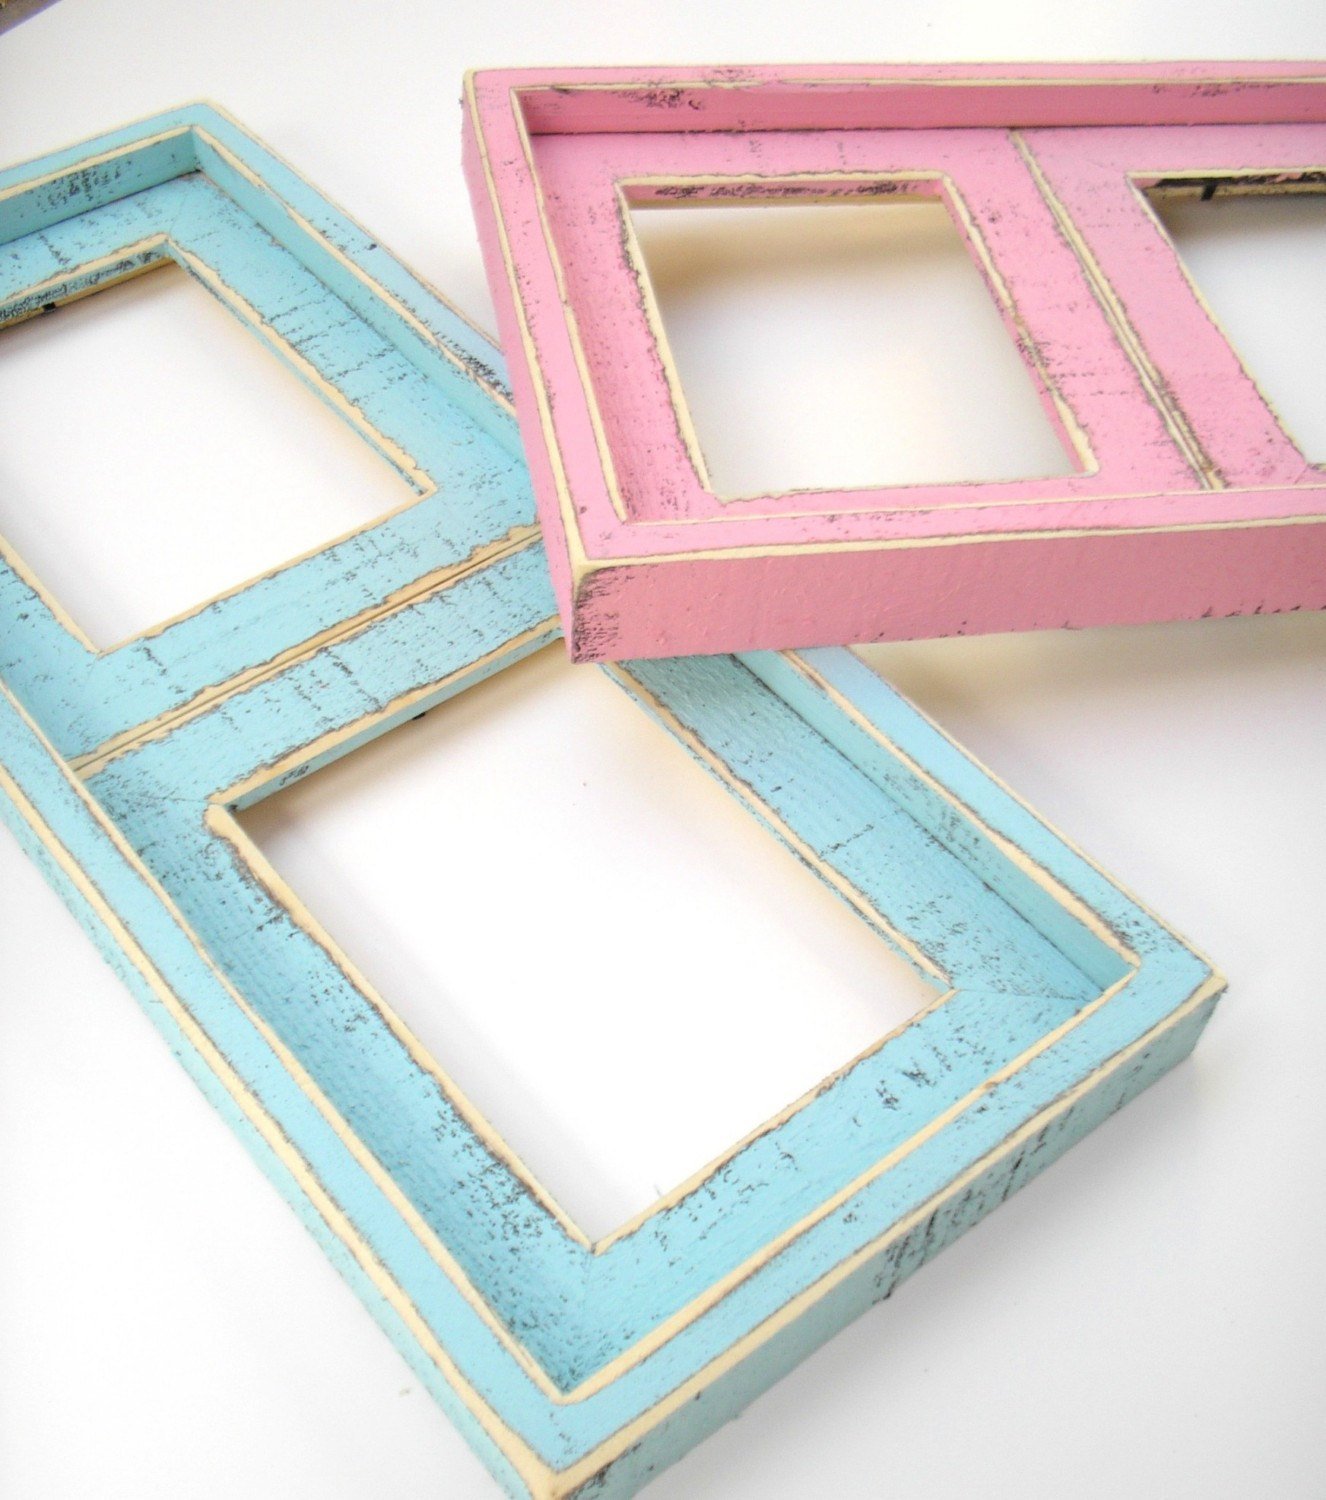 2 opening Multiple opening photo picture frame to fit 2) 5x7 OR 2) 4x6 openings.You choose the opening size and Color from 18 colors